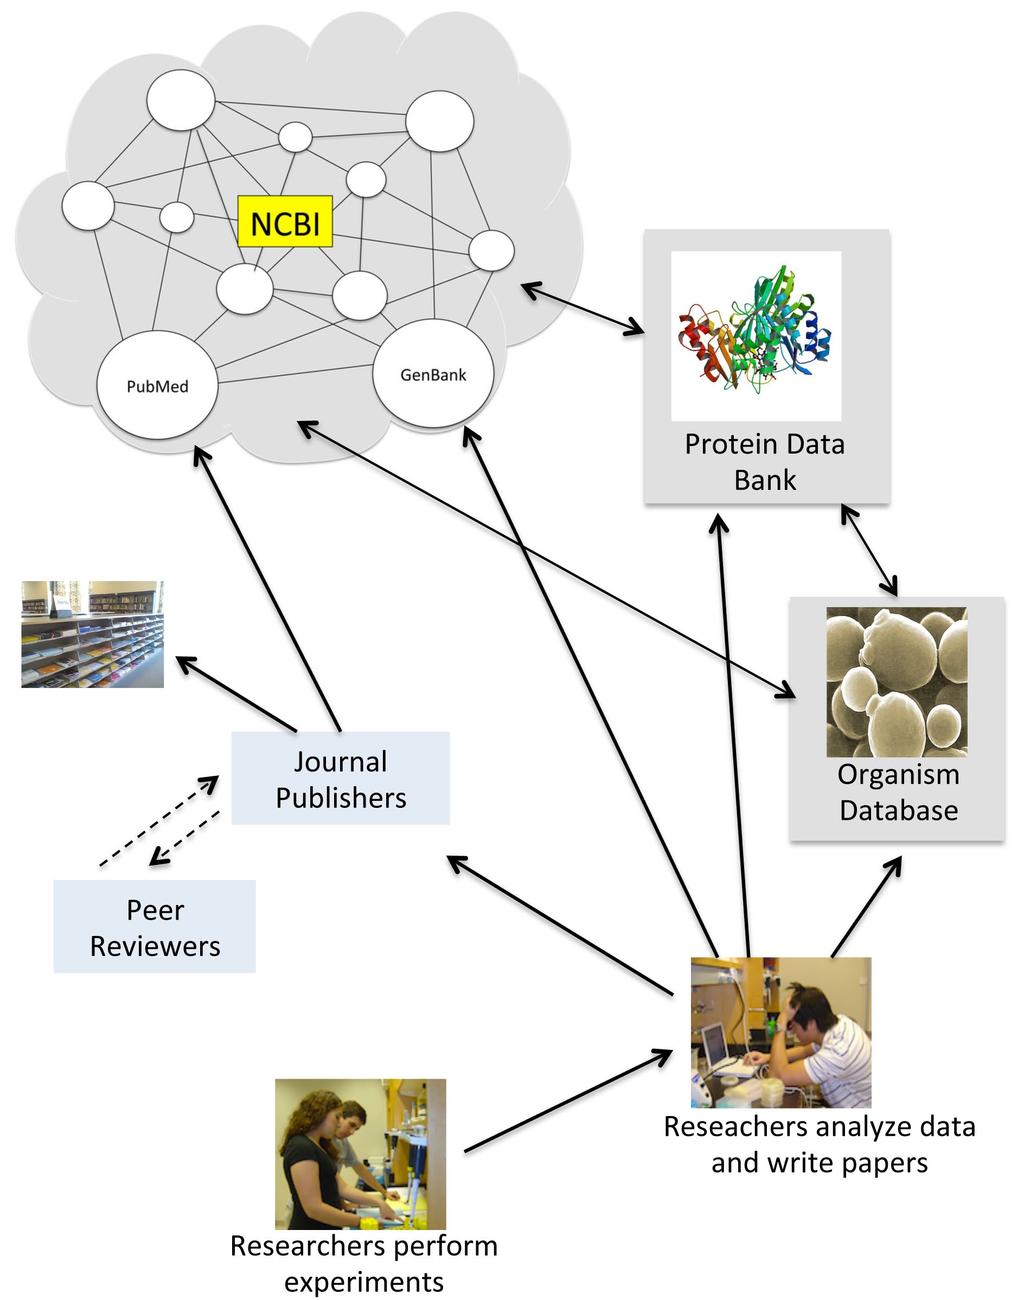 Information flow from experiments to databases. Researchers analyze their data and prepare manuscripts for publication.